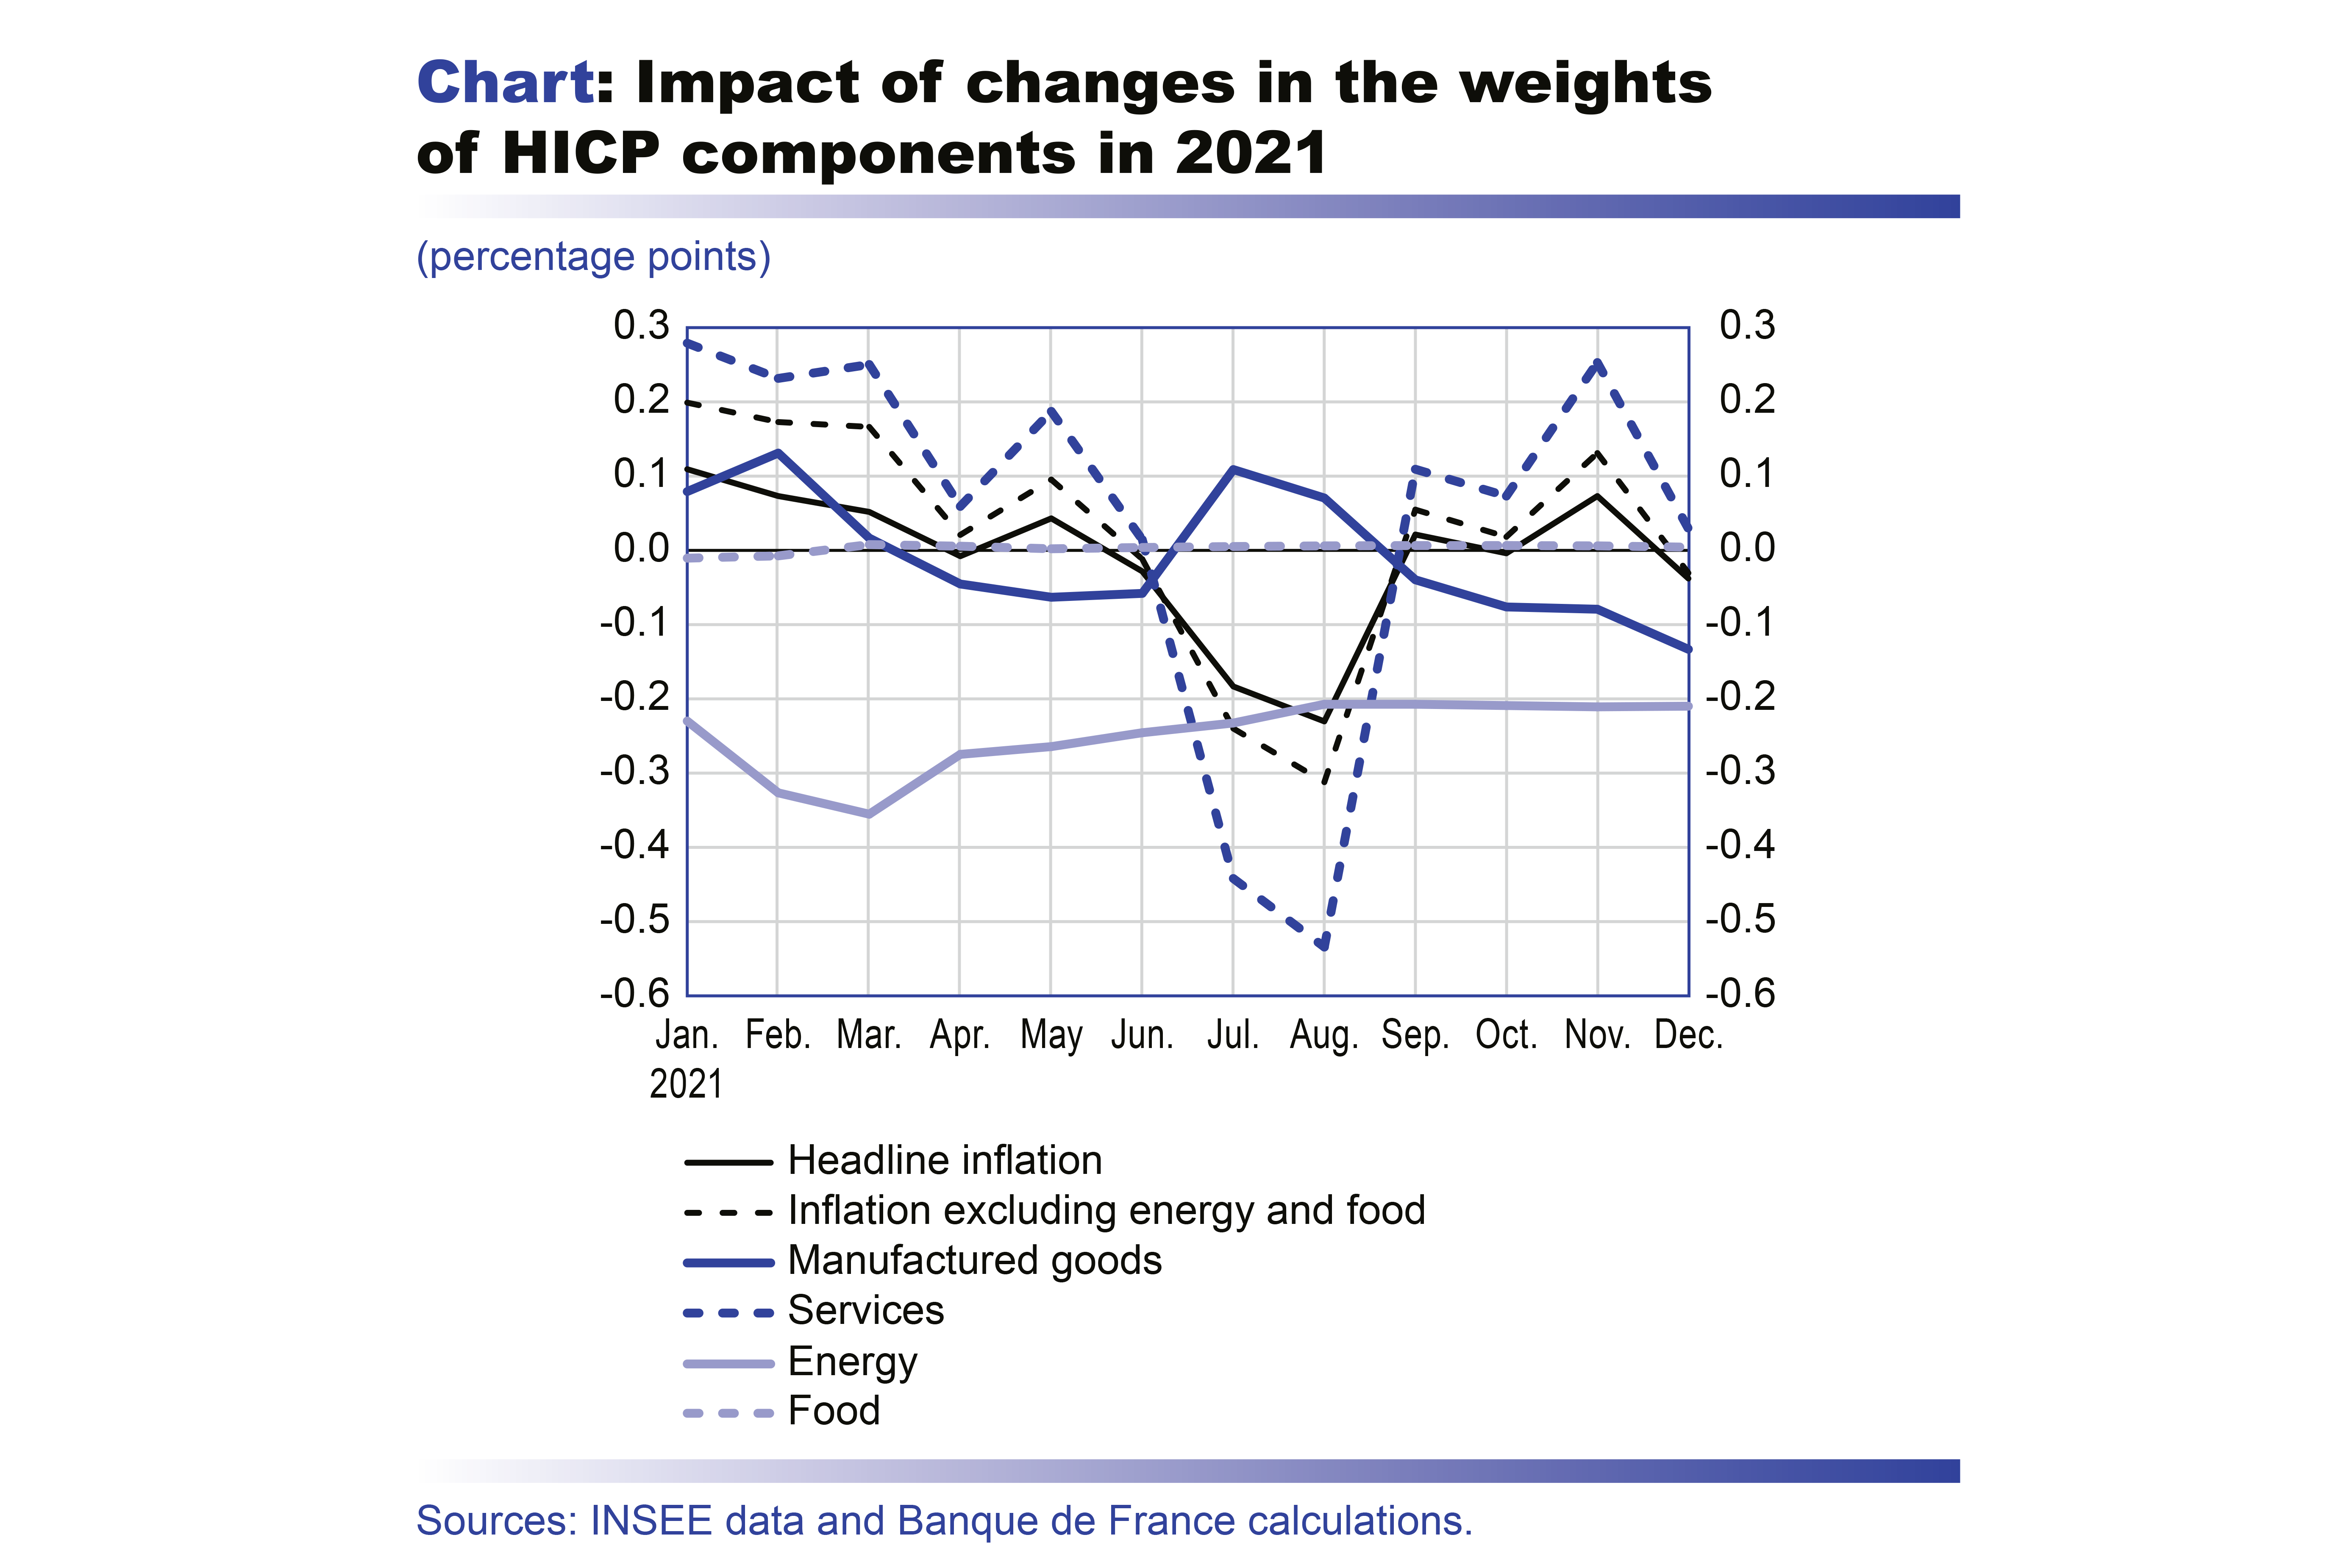 Macroeconomic projections – June 2021 - Impact of changes in the weights of HICP components in 2021